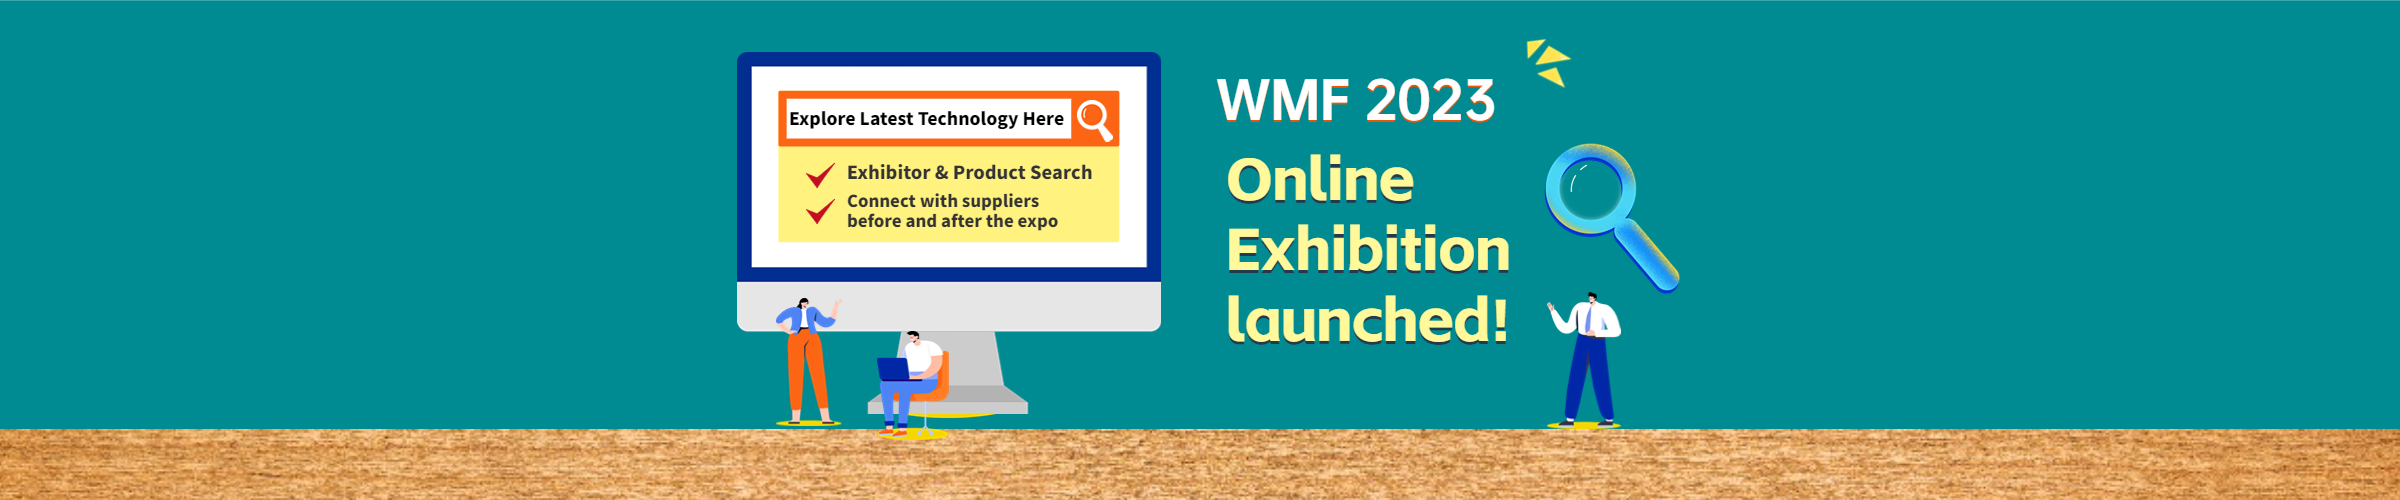 WMF2023 Online Exhibition launched! Connect with suppliers before and after the expo